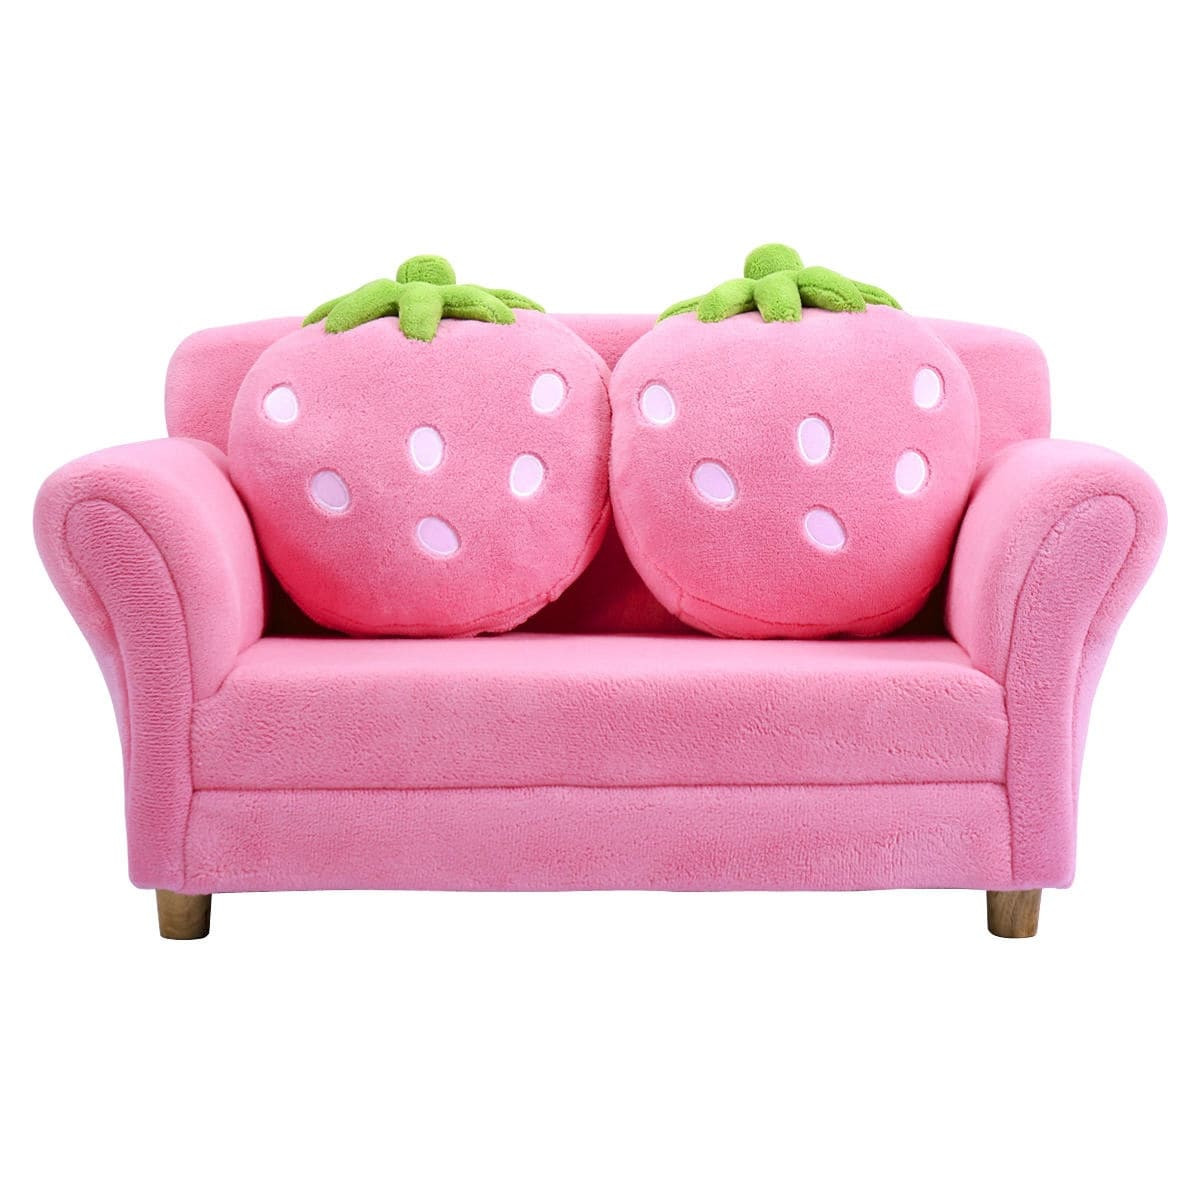 Kids Sofa And Chair
 Kids Pink Sofa Armrest Chair Lounger Couch w 2 Pillow